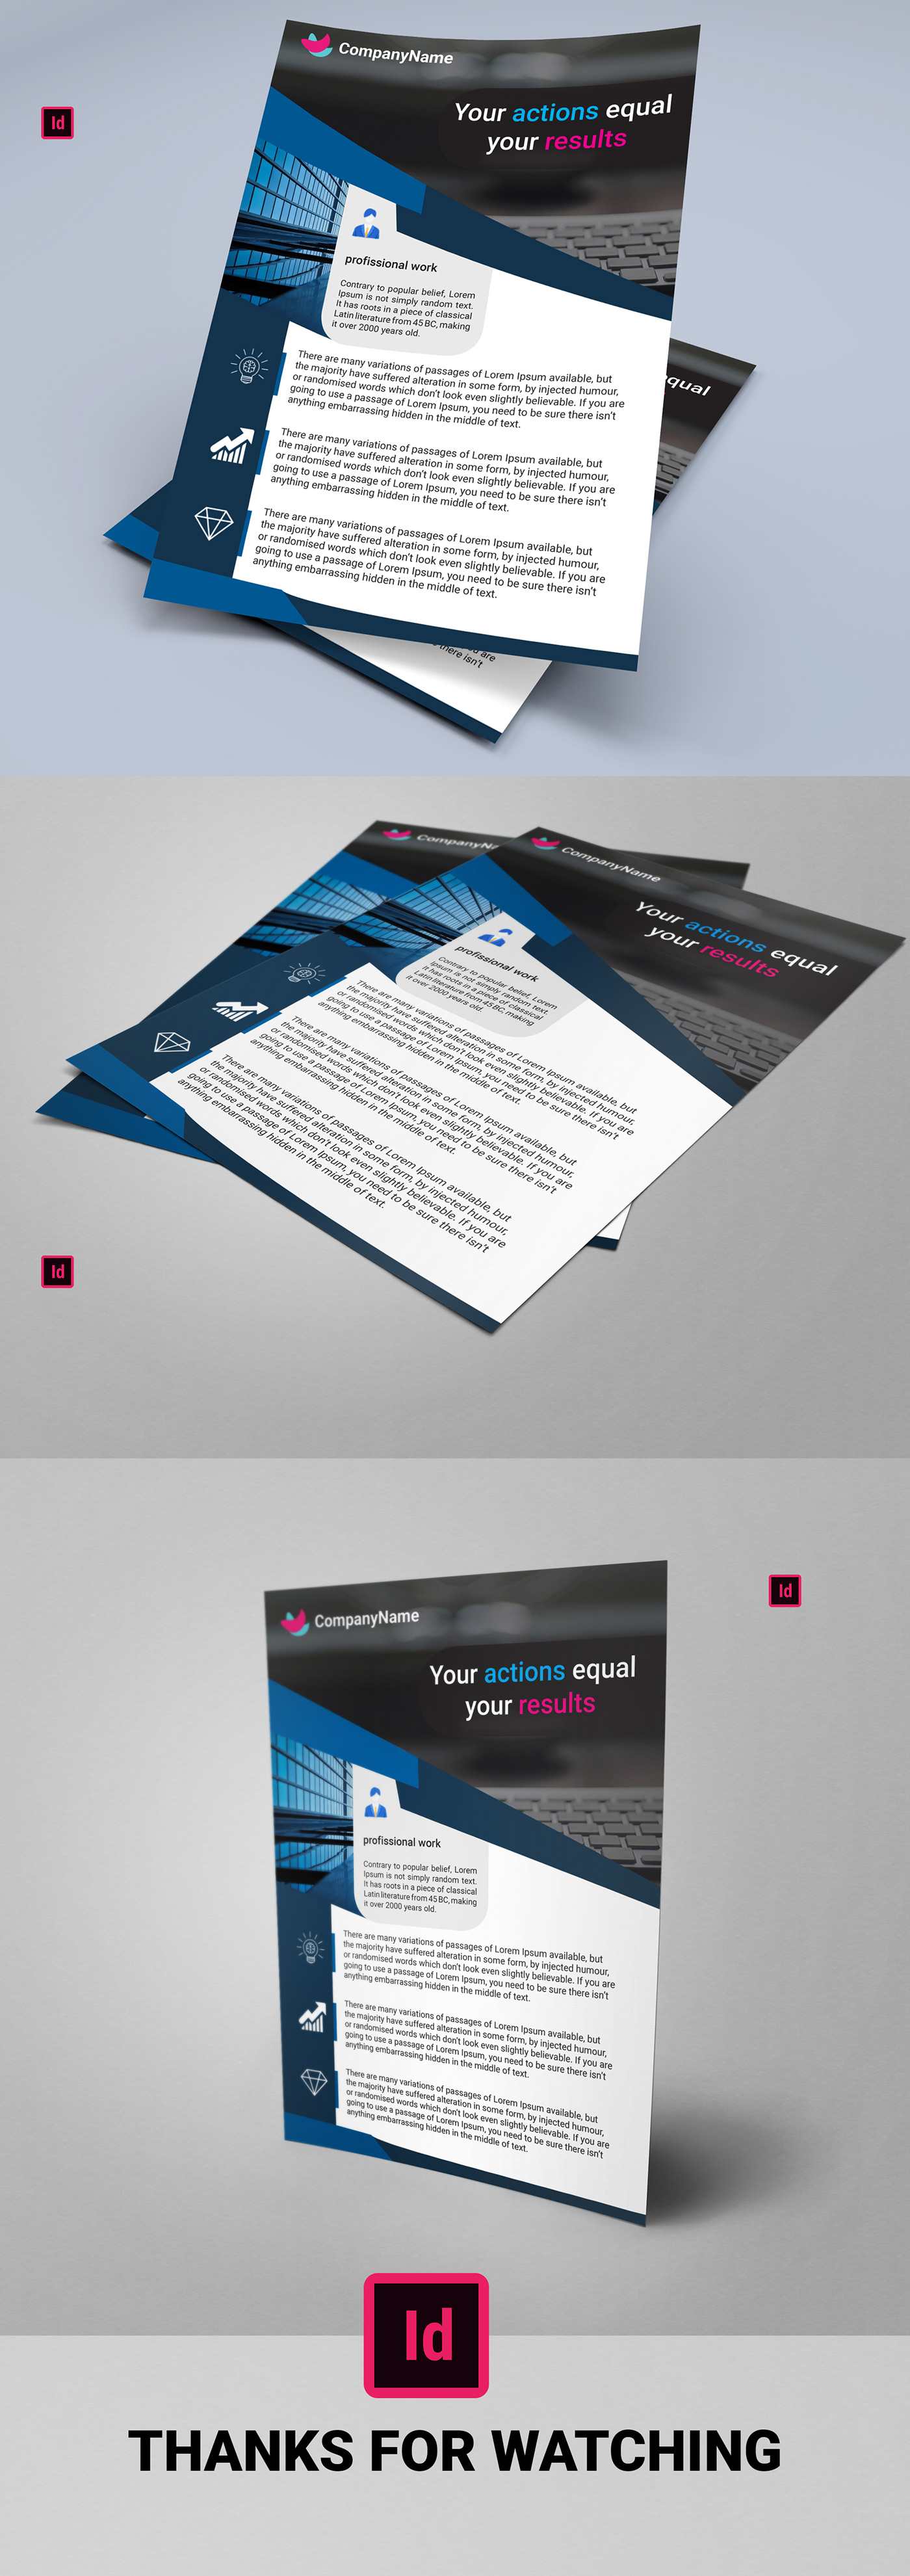 InDesign business flyer 300dpi a4 print ready